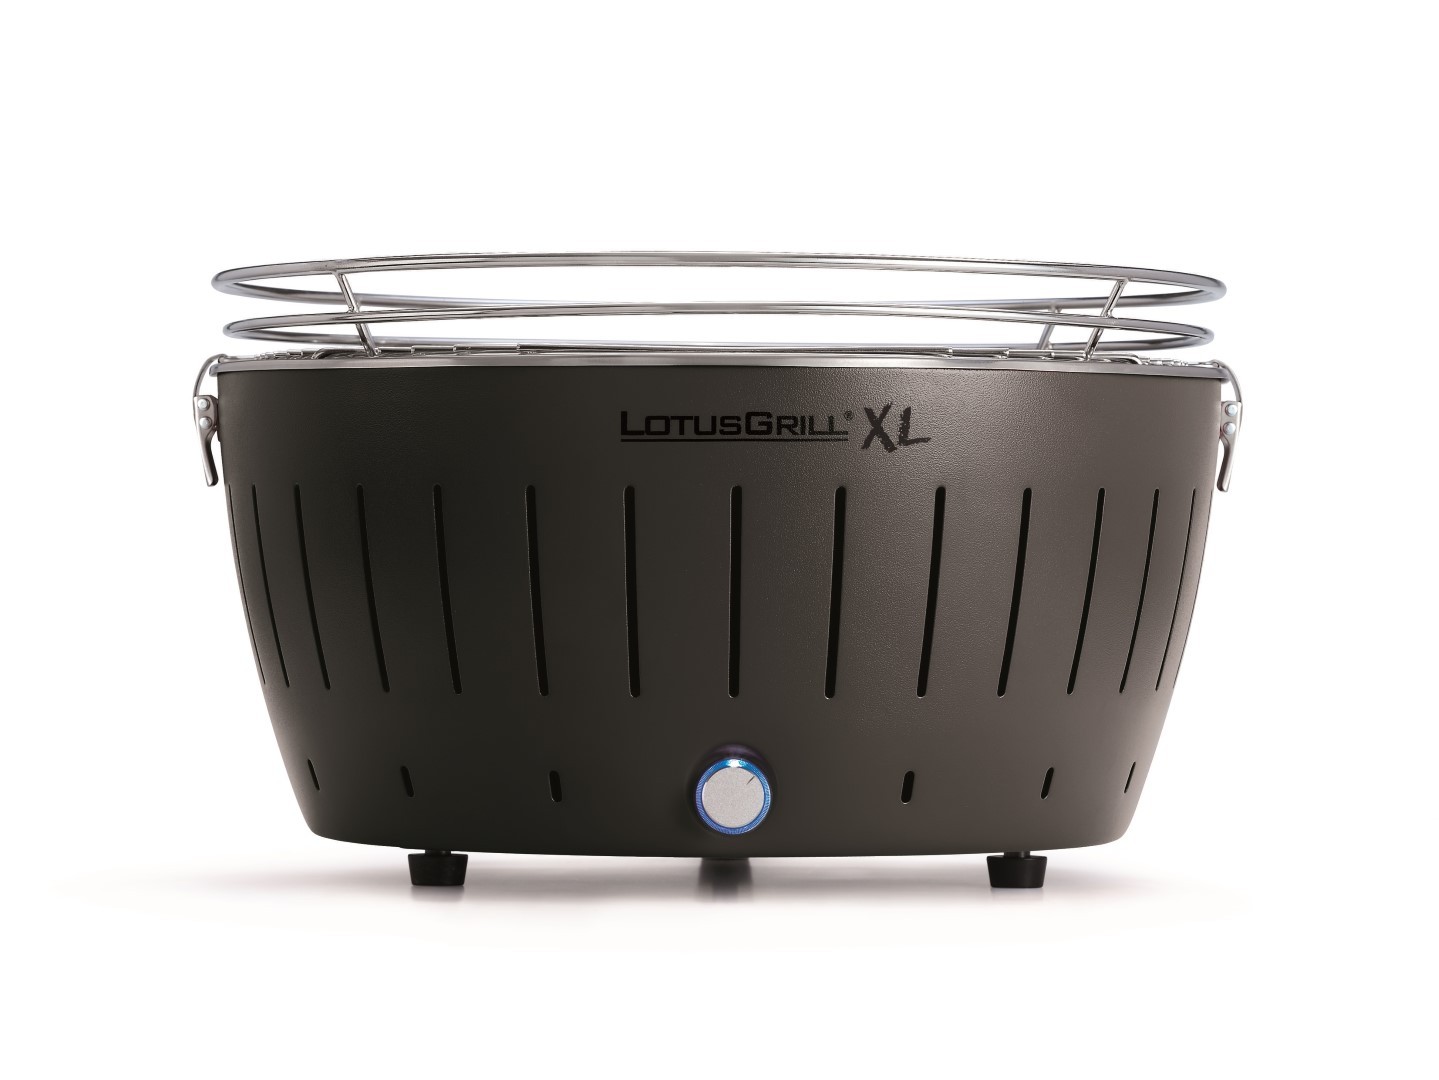 https://www.warentuin.nl/media/catalog/product/1/7/1774260023010059_lotusgrill_barbecue_barbecue_xl_antraciet_o_435_mm_lotusgrill__47e9.jpg